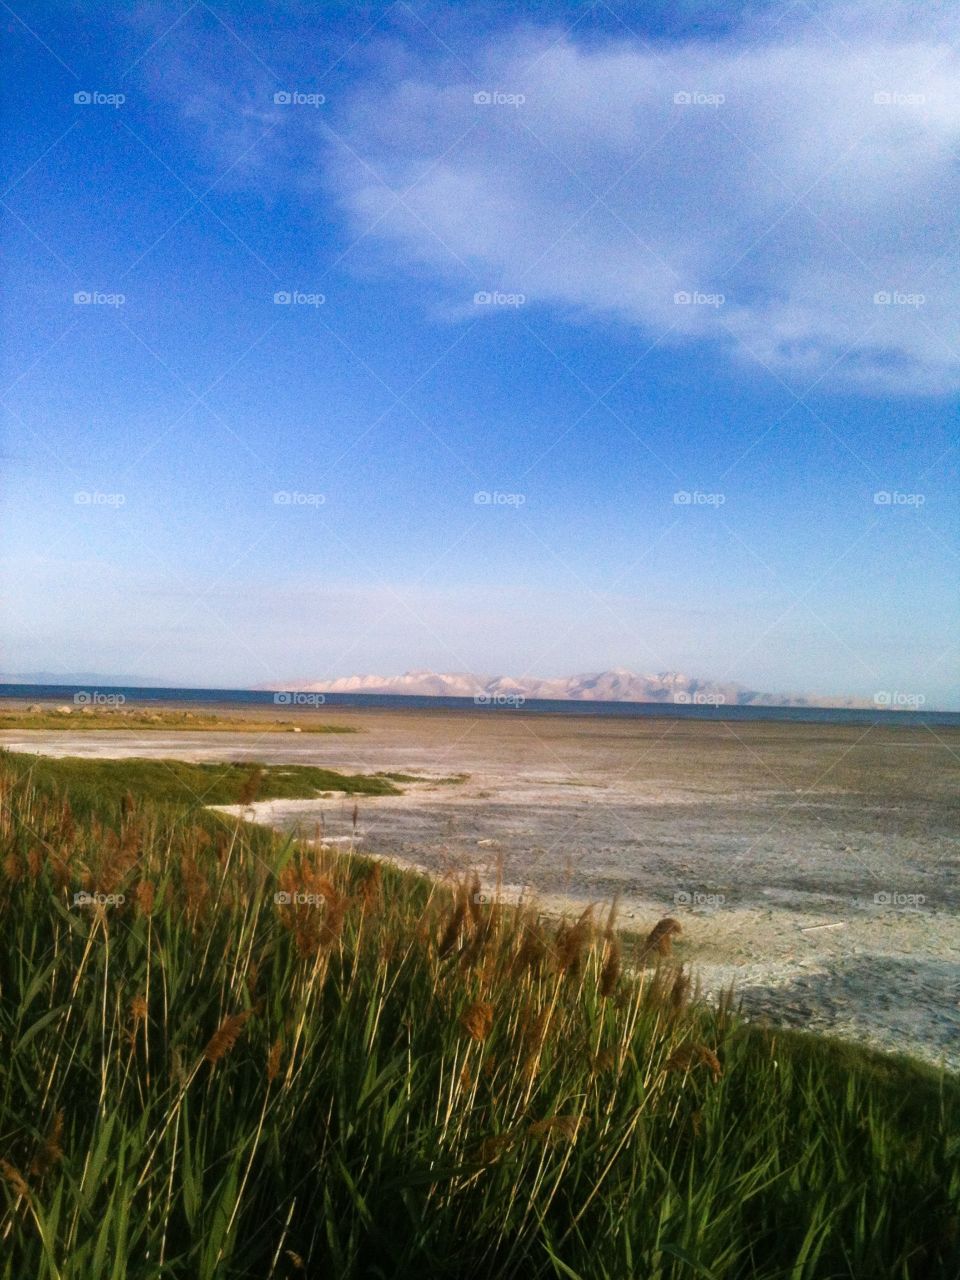 Salt Lake in Utah, dry, but with blue mostly clear skies, and mountains off in the distance